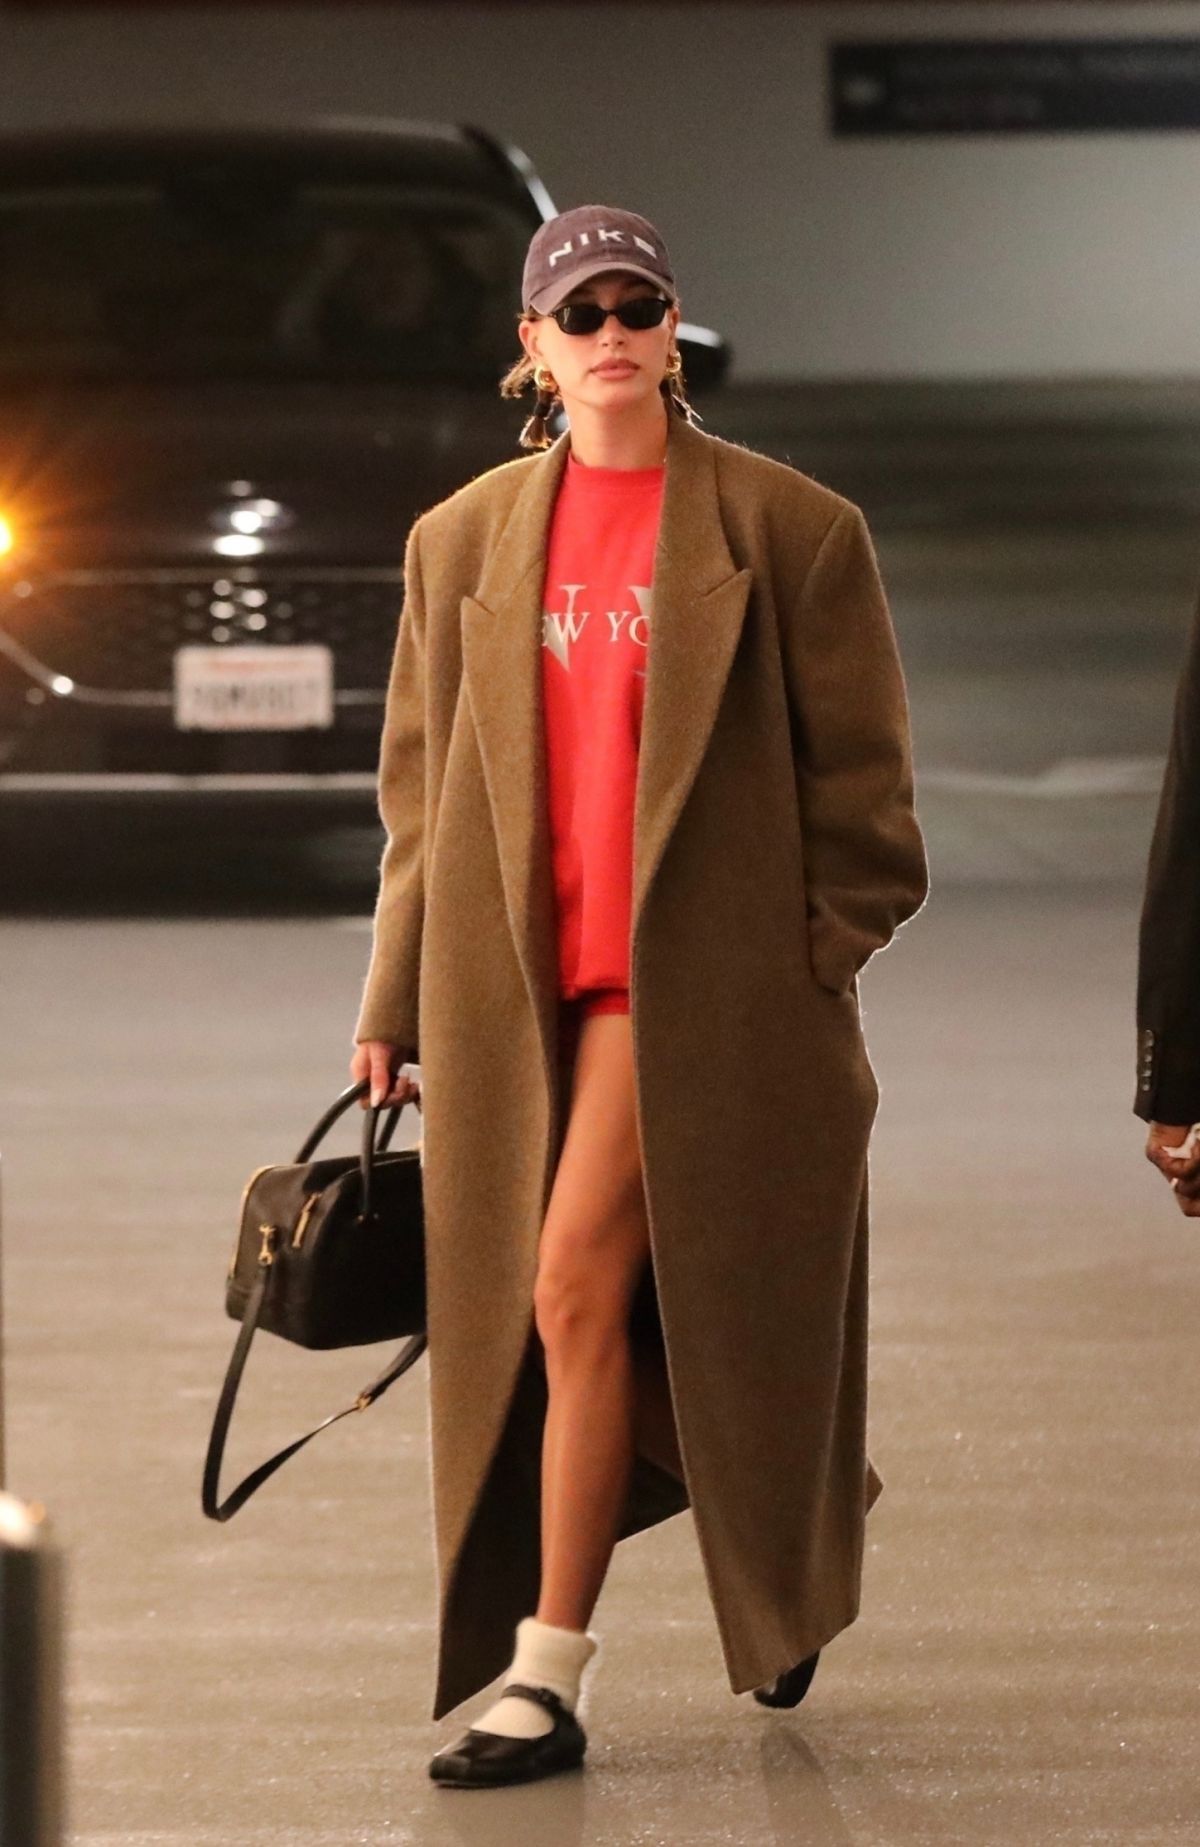 Hailey Bieber in Red Sweatshirt Arrives at LA Doctor’s Appointment 2